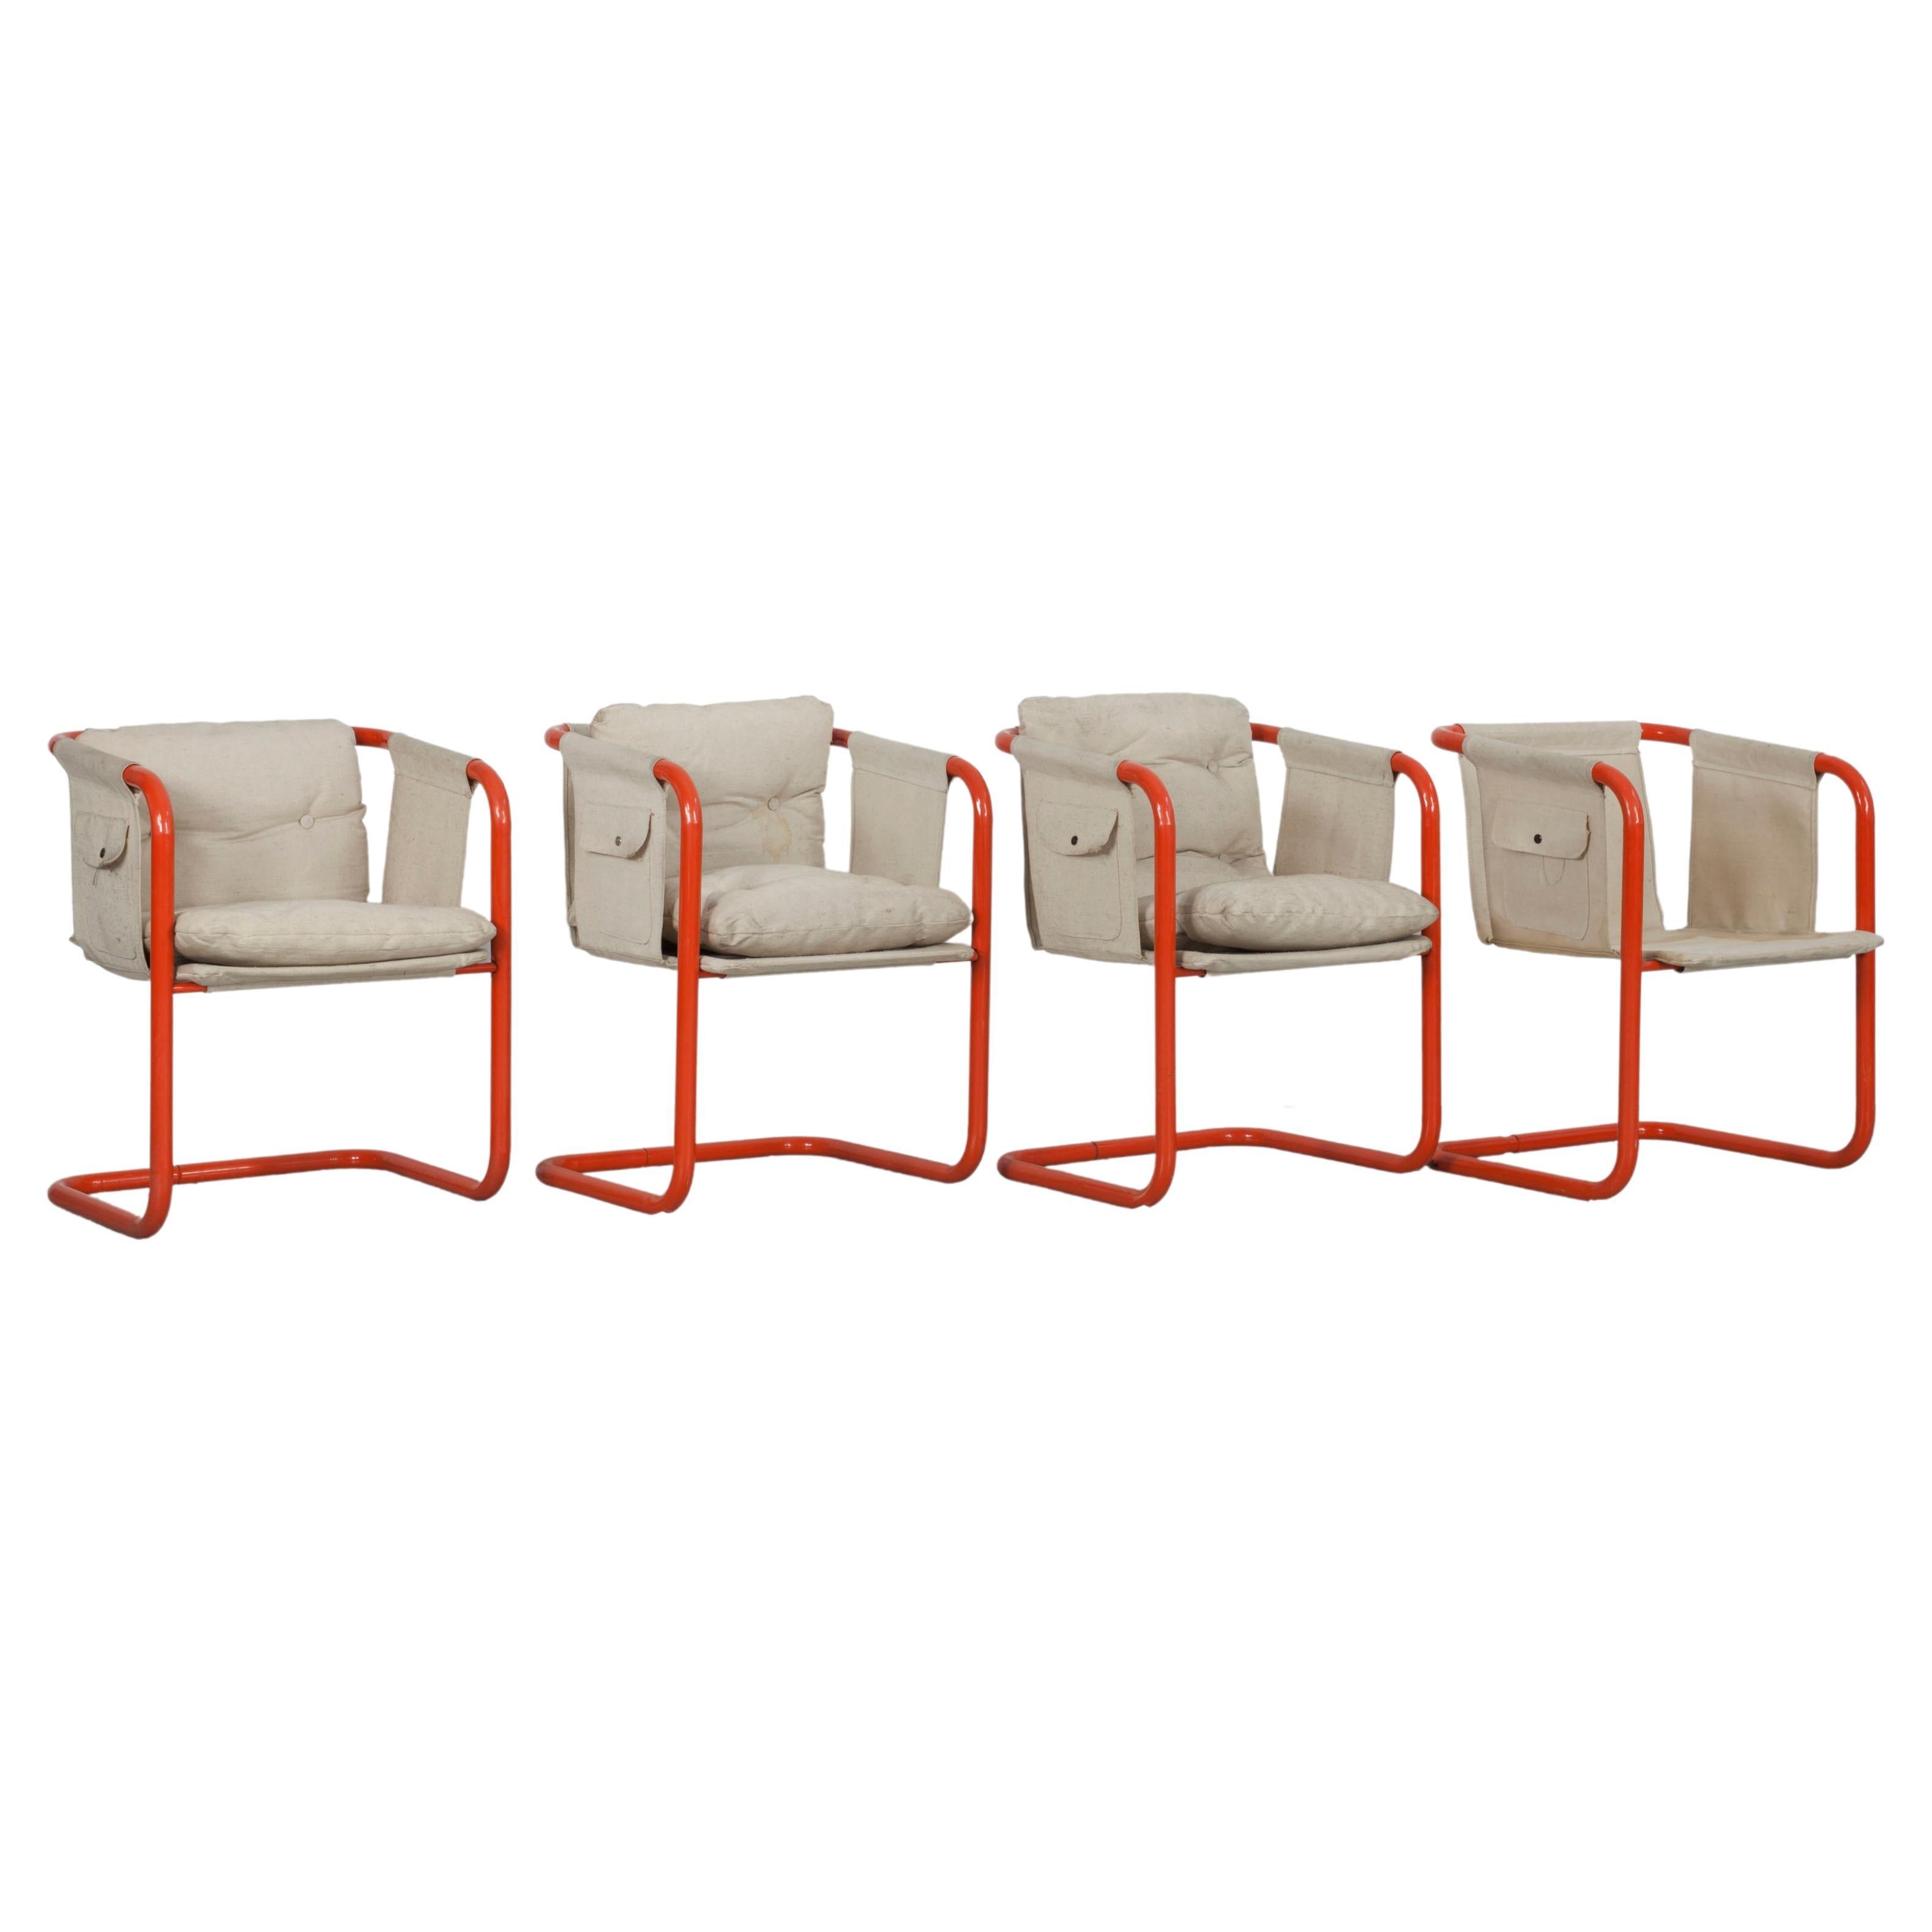 4 Cantilever Armchairs in the Manner of Gae Aulenti, Italy, 1970s